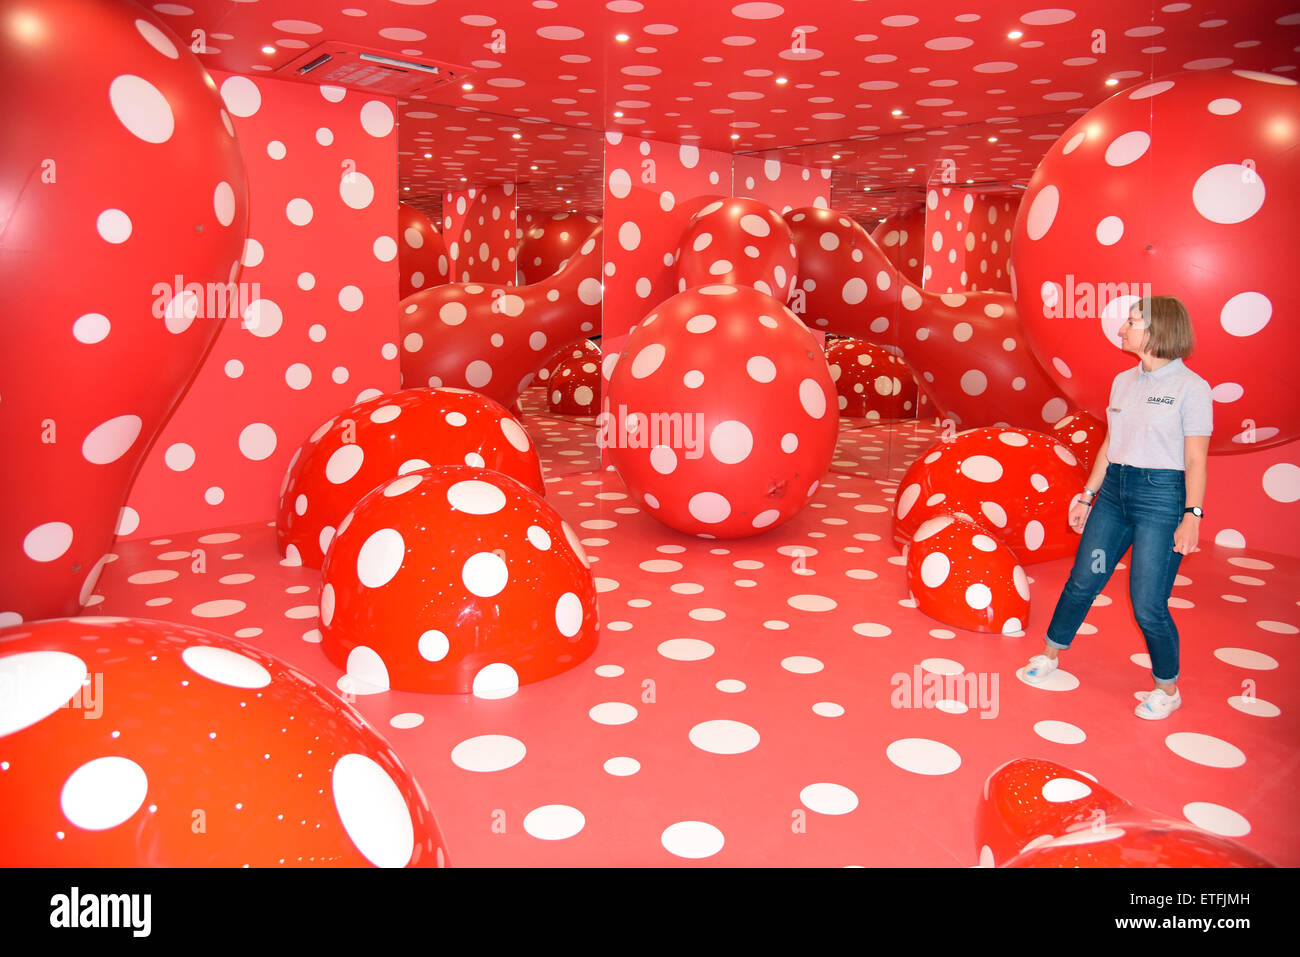 Moscow, Russia. 10th June, 2015. A woman looks at an installation entitled 'Infinity Theory' by Japanese artist Yayoi Kusama in the Garage Museum of Contemporary Art in Moscow, Russia, 10 June 2015. The largest museum for contemporary art in Russia has moved into its new building at Gorky Park. Photo: Ulf Mauder/dpa/Alamy Live News Stock Photo